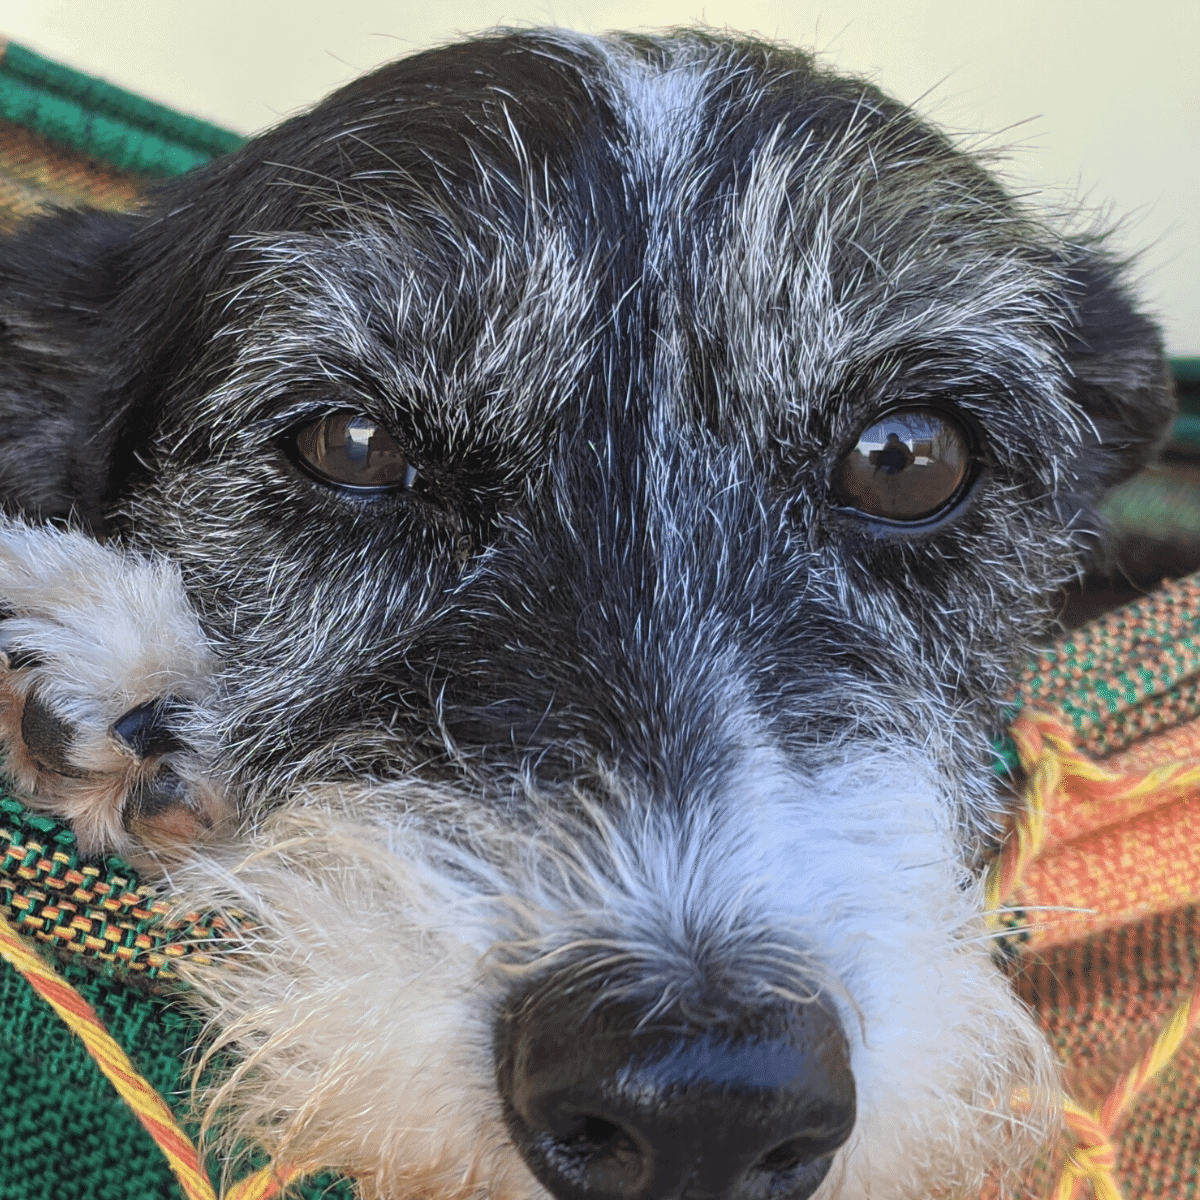 Senior dog terrier like with grey muzzle and gray body staring into the camera